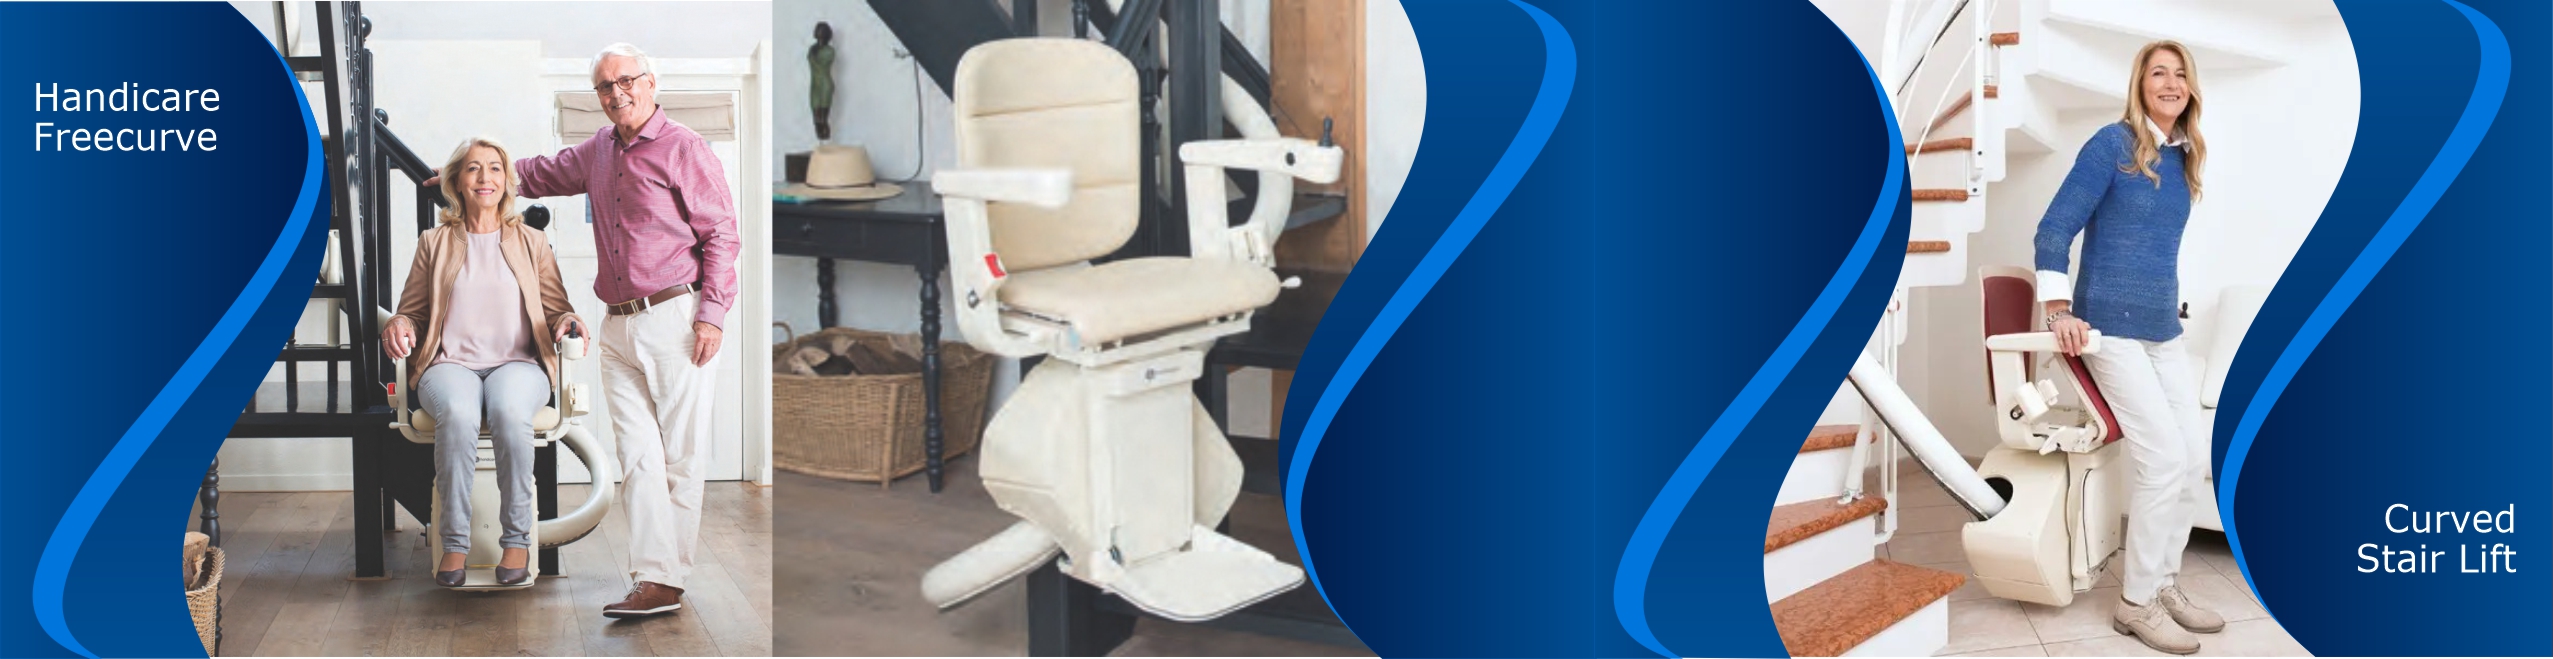 Handicare Freecurve Curved Stair Lift